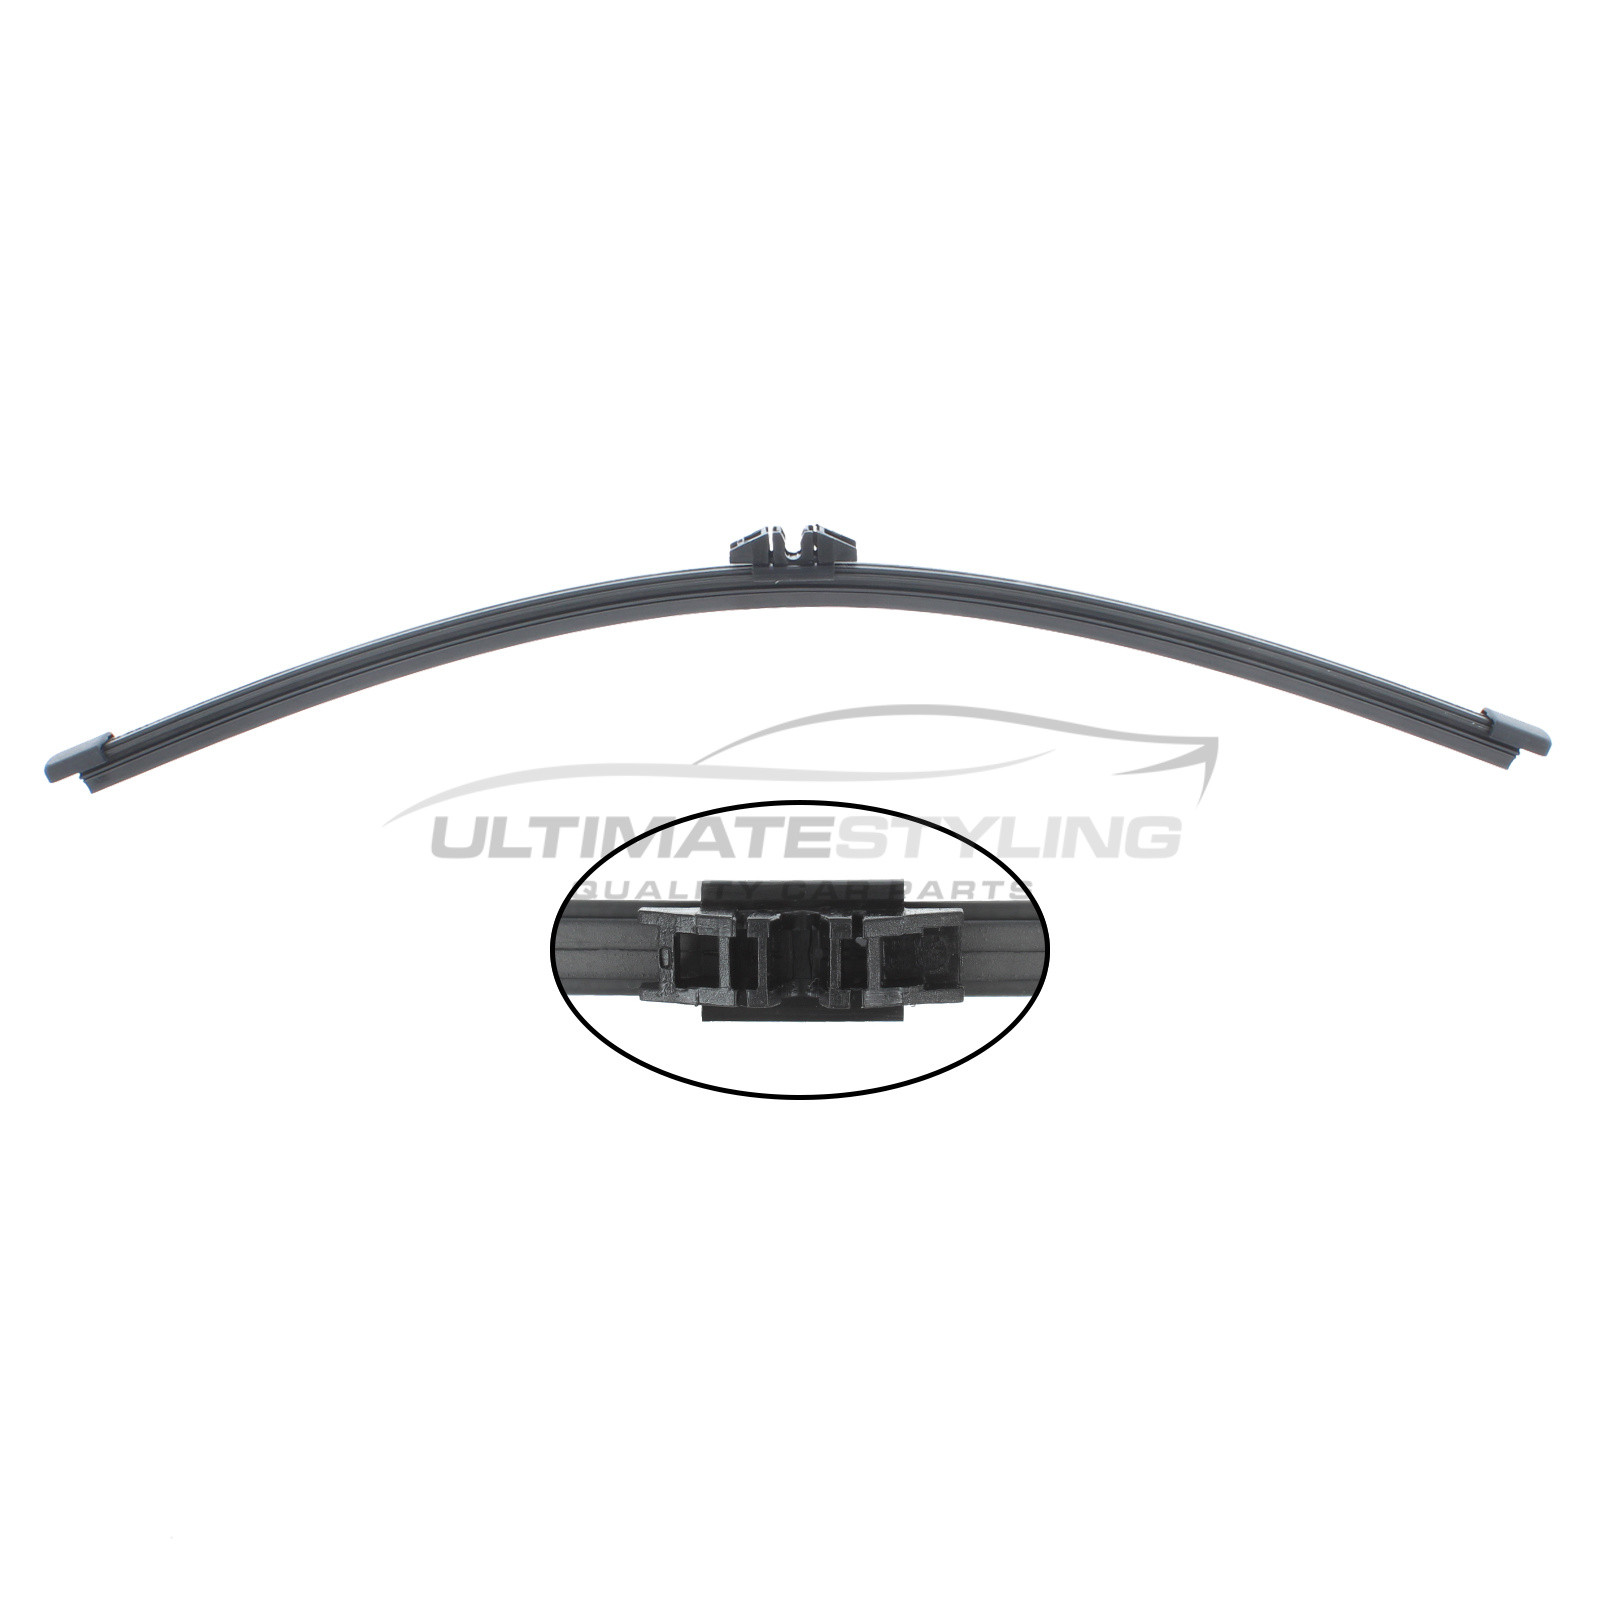 Rear Wiper Blade for Vauxhall Vectra